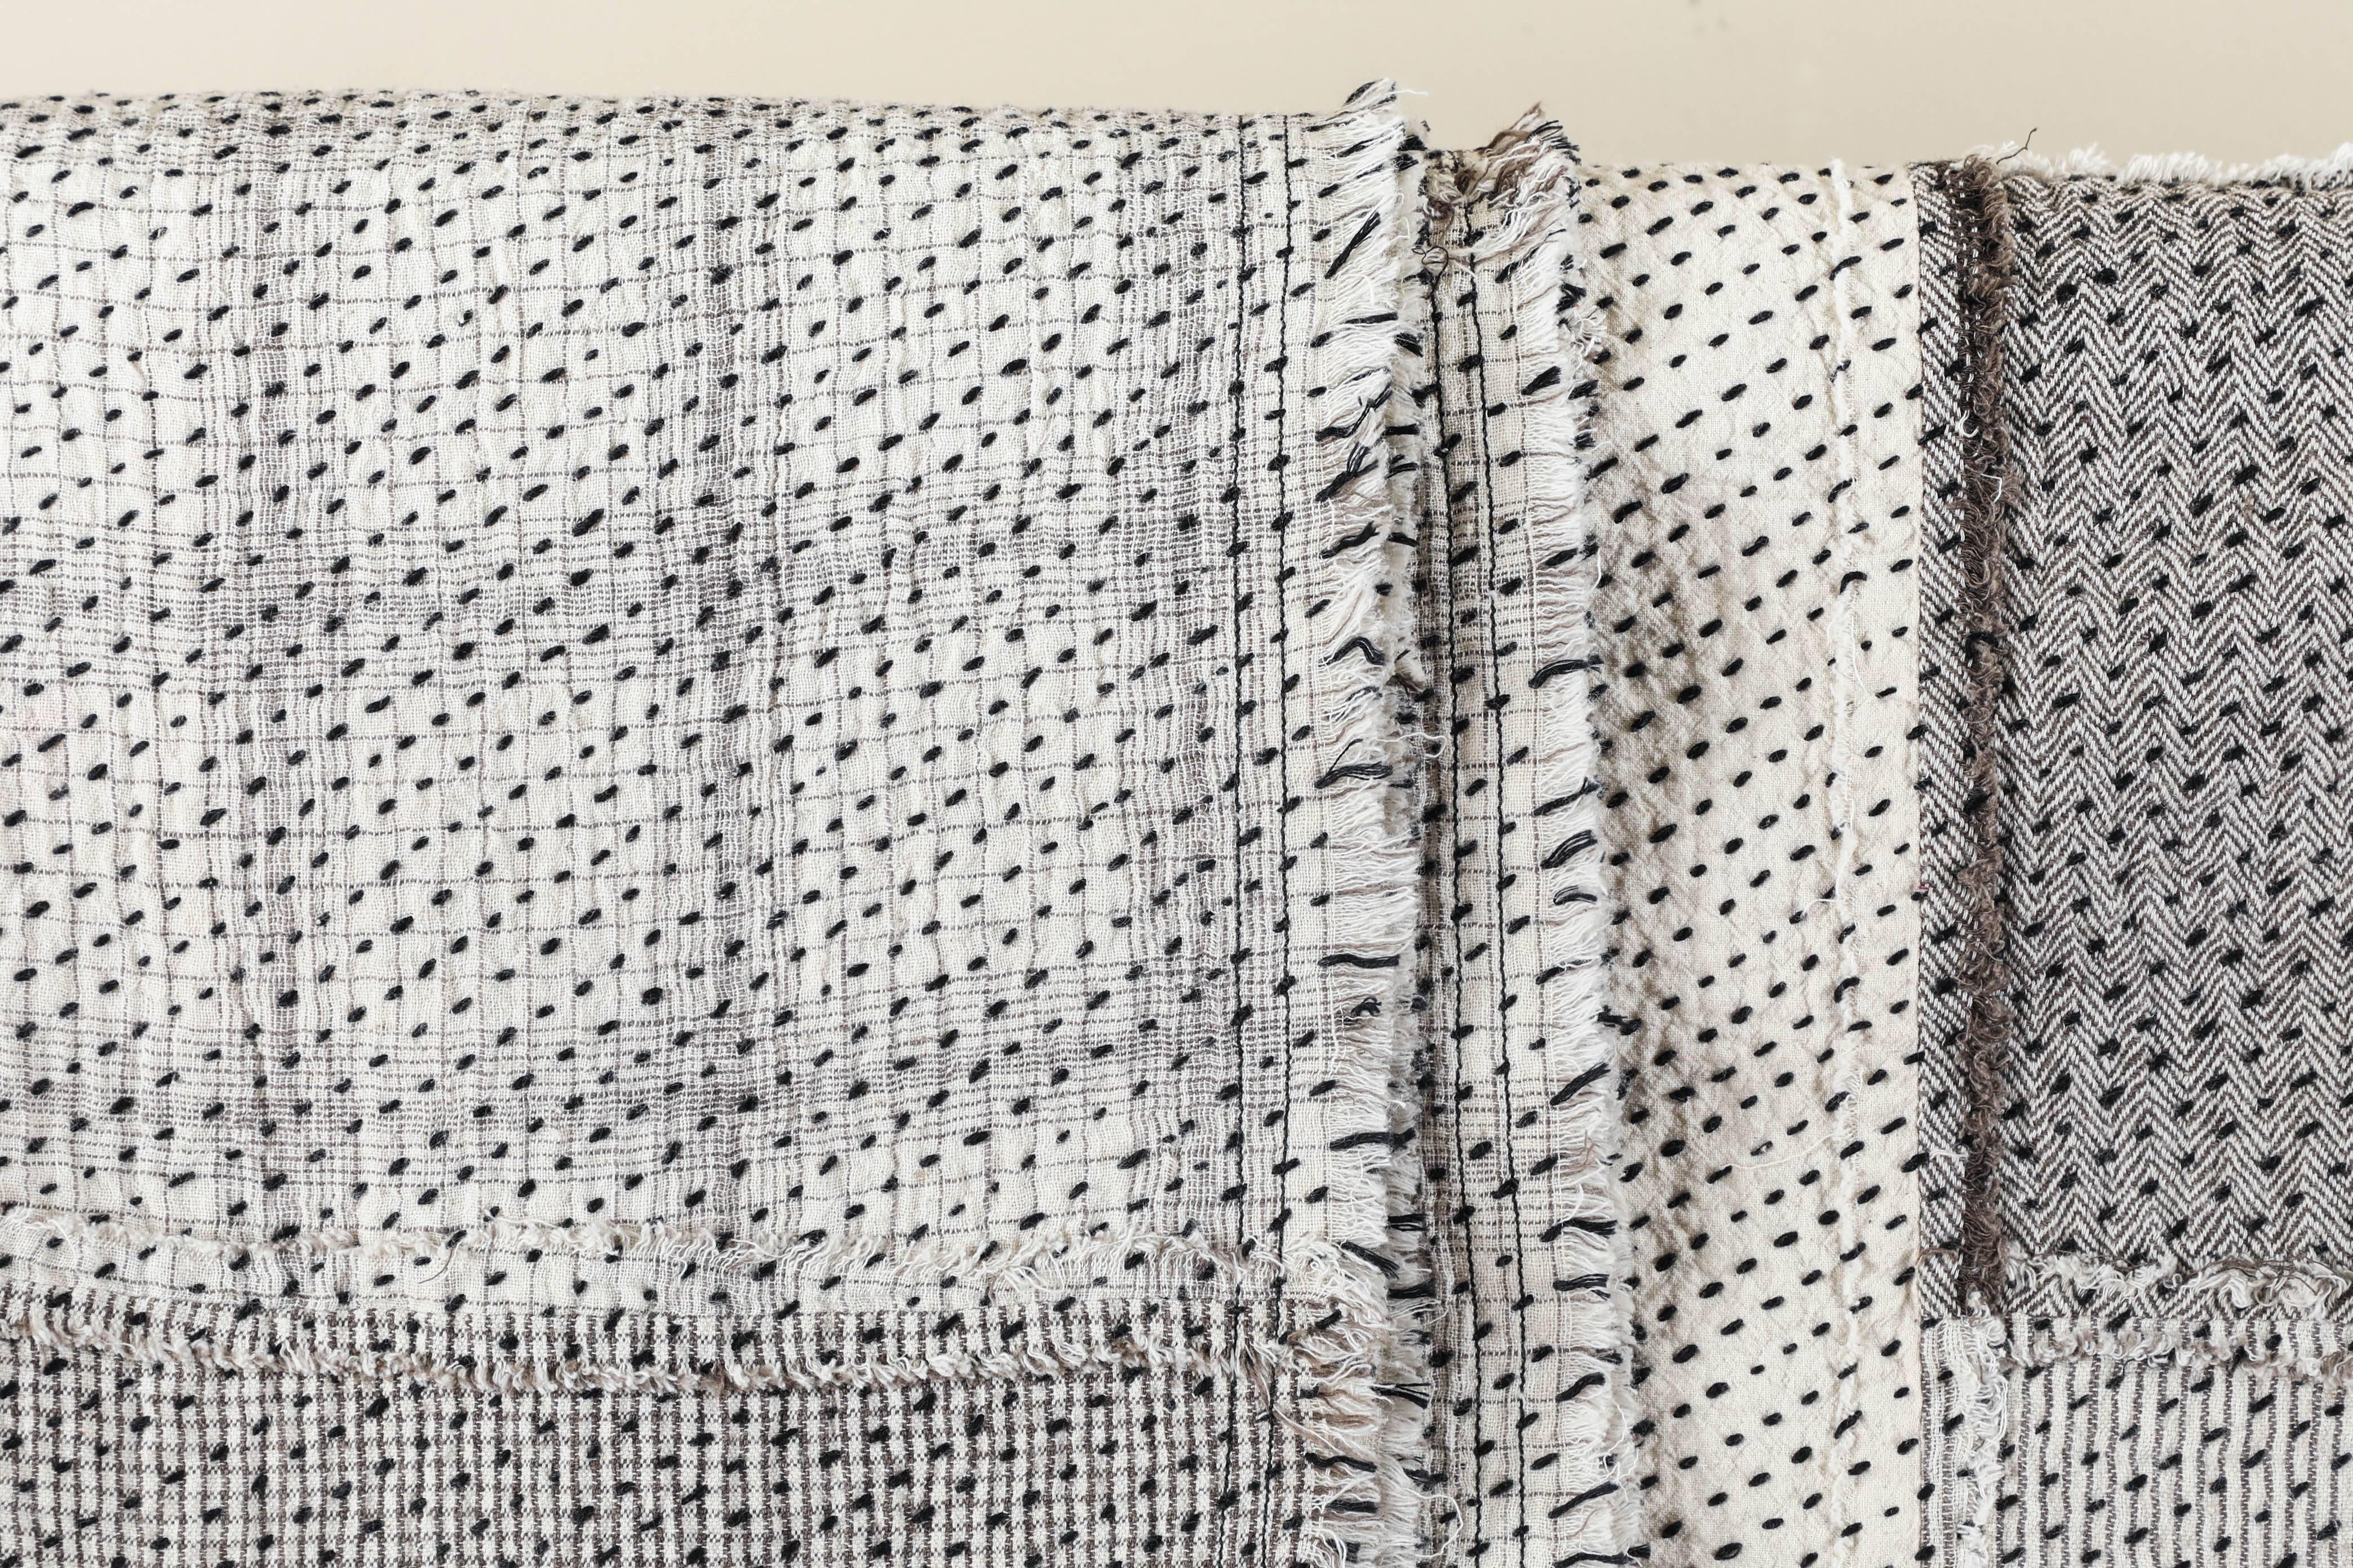 Contemporary handwoven and quilted Stitch by Stitch cotton quilt. Frayed edges. Patched pieces of cotton with ivory and black designs on one side and white khadi on the reverse. Black cotton quilting stitches. Handwoven, handmade in Gujarat, India.